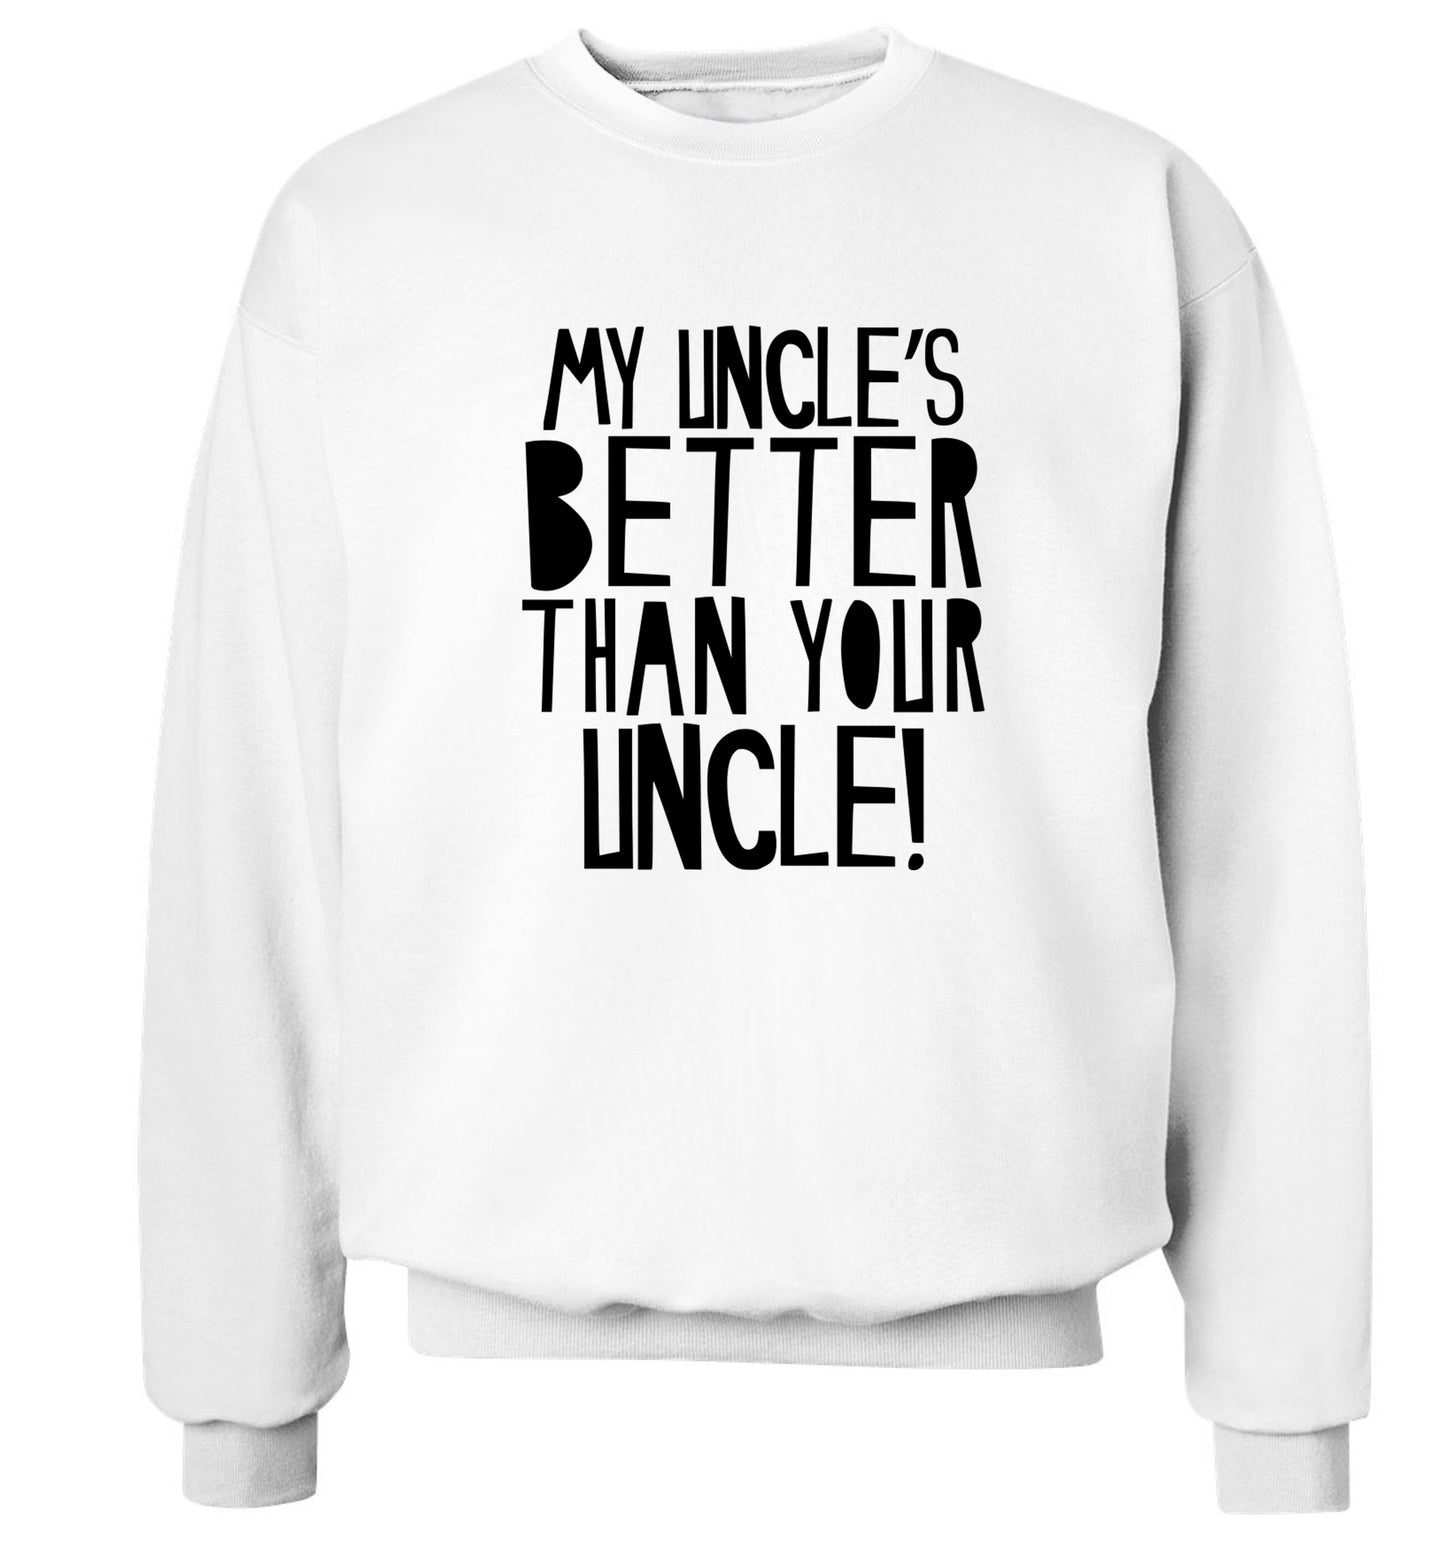 My uncles better than your uncle Adult's unisex white Sweater 2XL